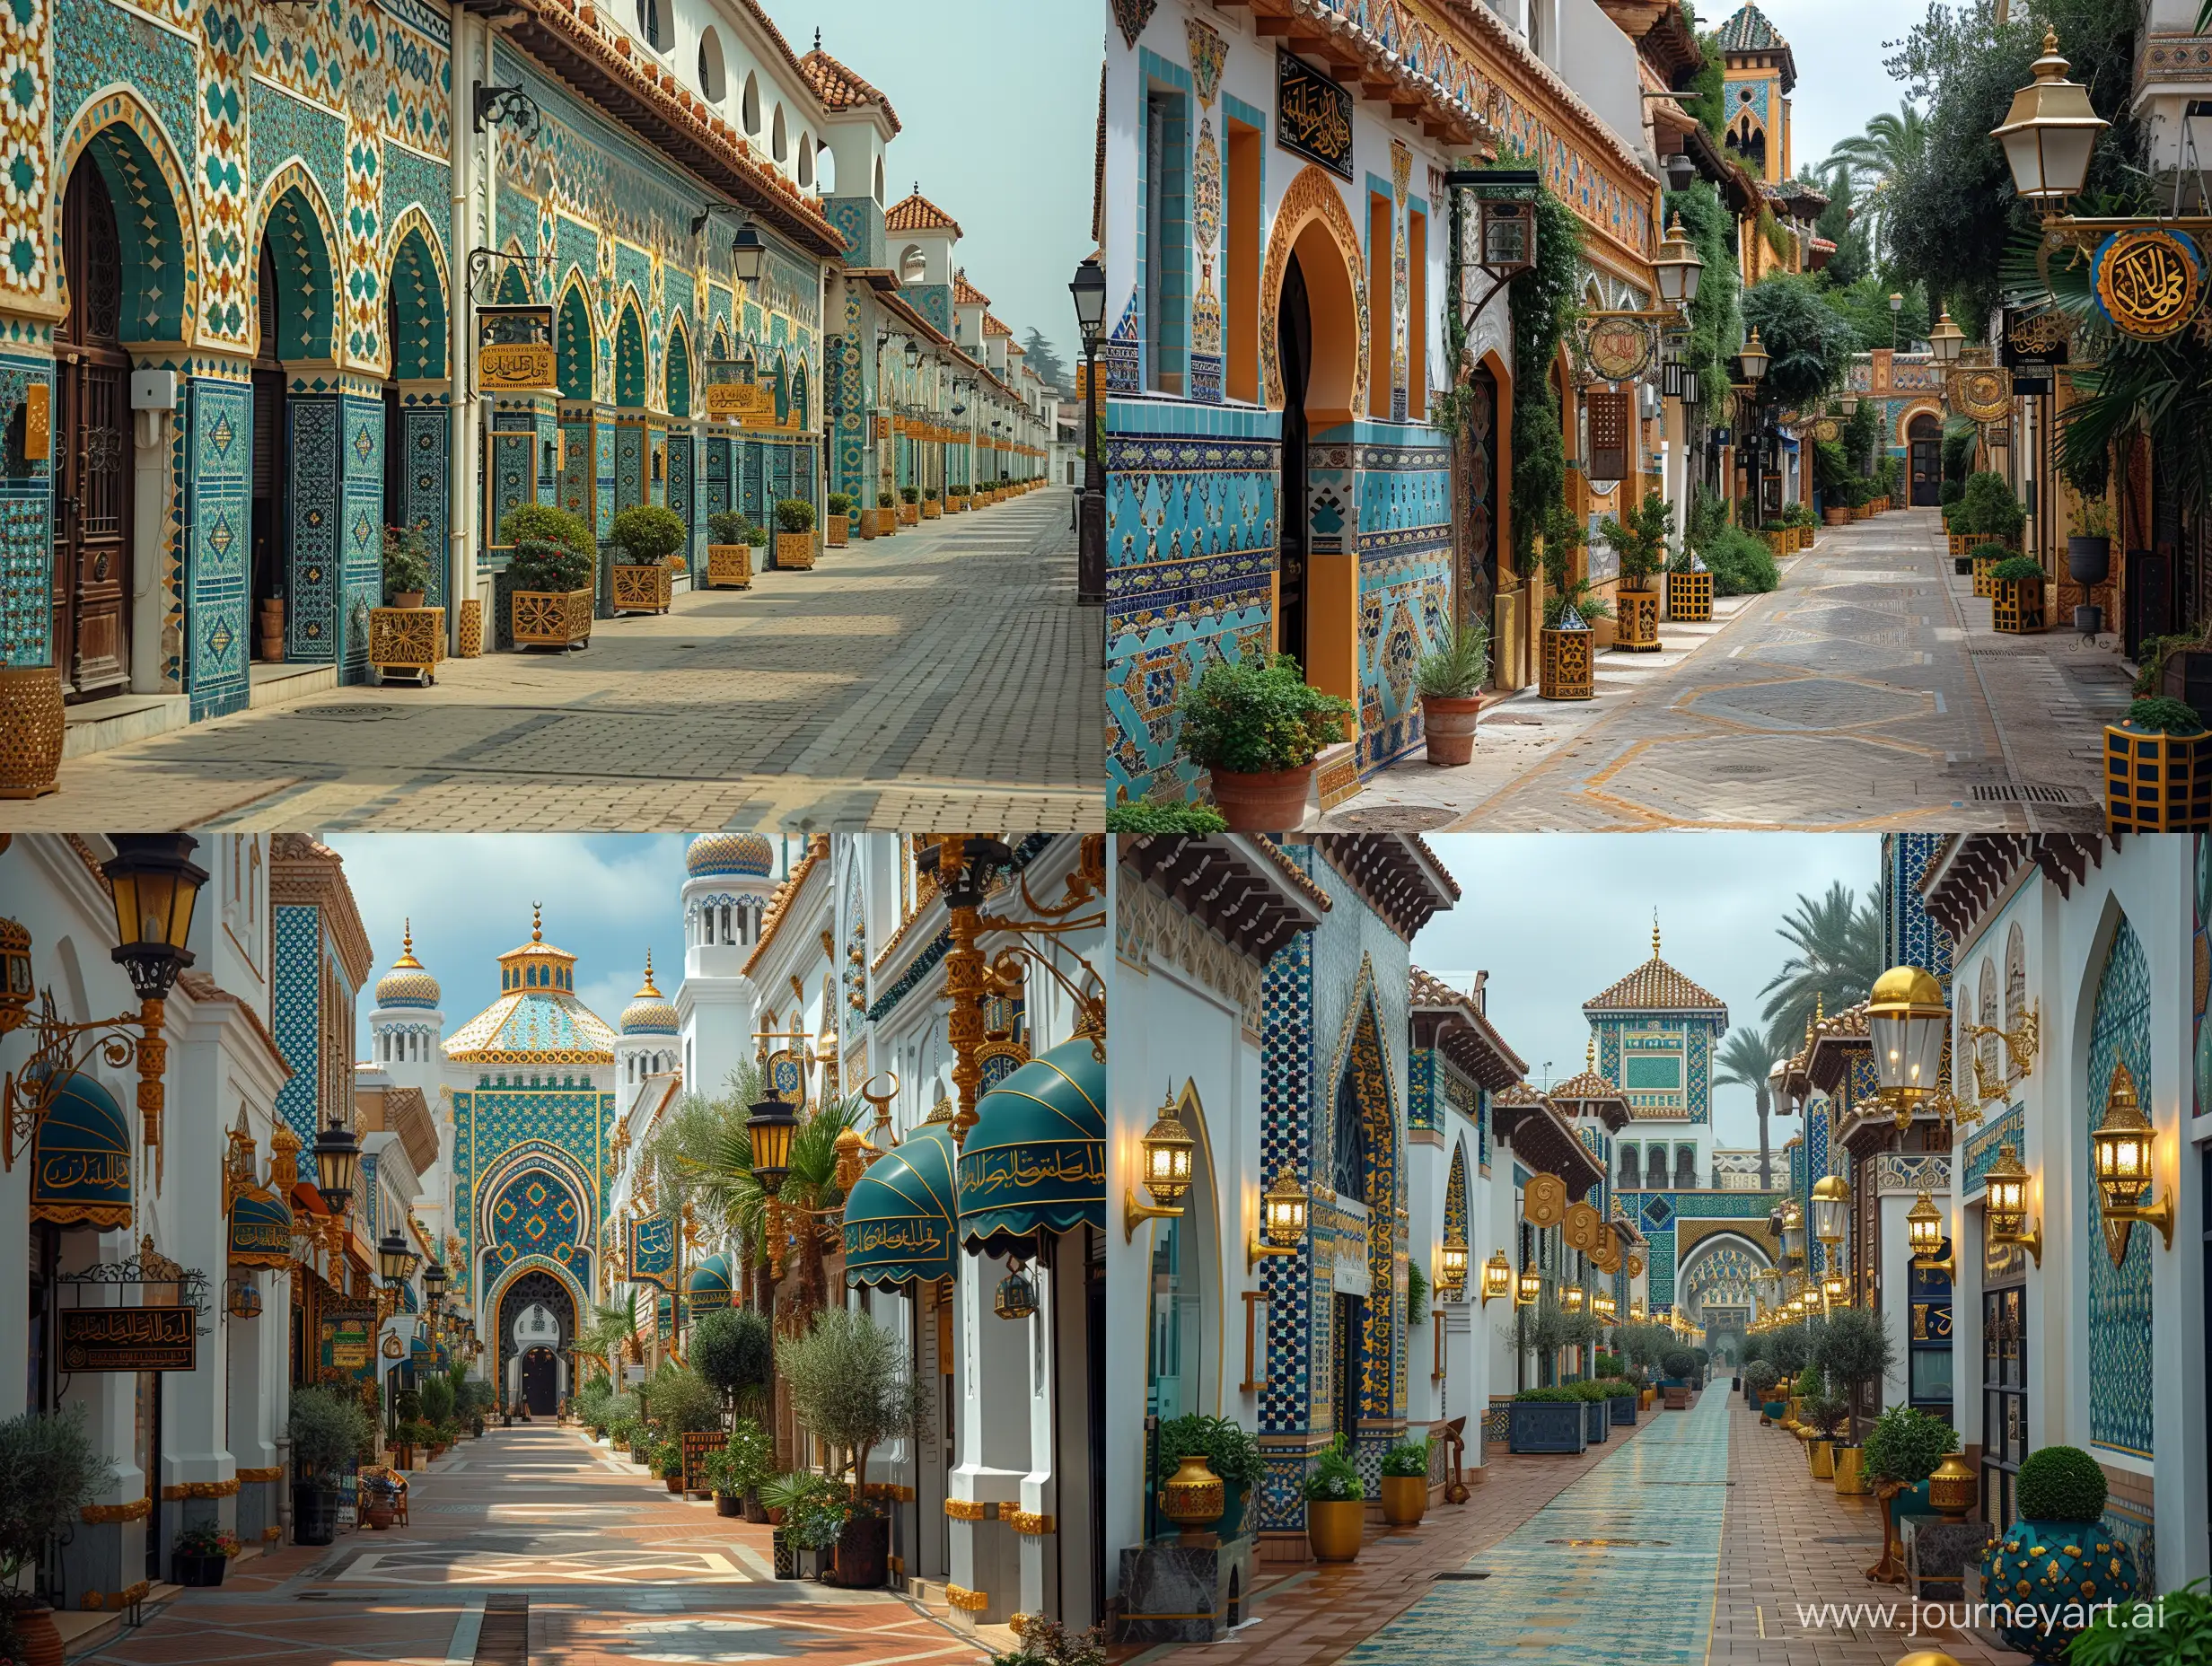 a street in a Moorish town full of Morocco Madrasa architectures in Paris, Ben youssef madrasa lined along the streets, all having Ben youssef madrasa exterior and Blue white turquoise gold tiled Islamic Geometric pattern Zellij, Moorish lamps and gold ornamented signboards --s 999